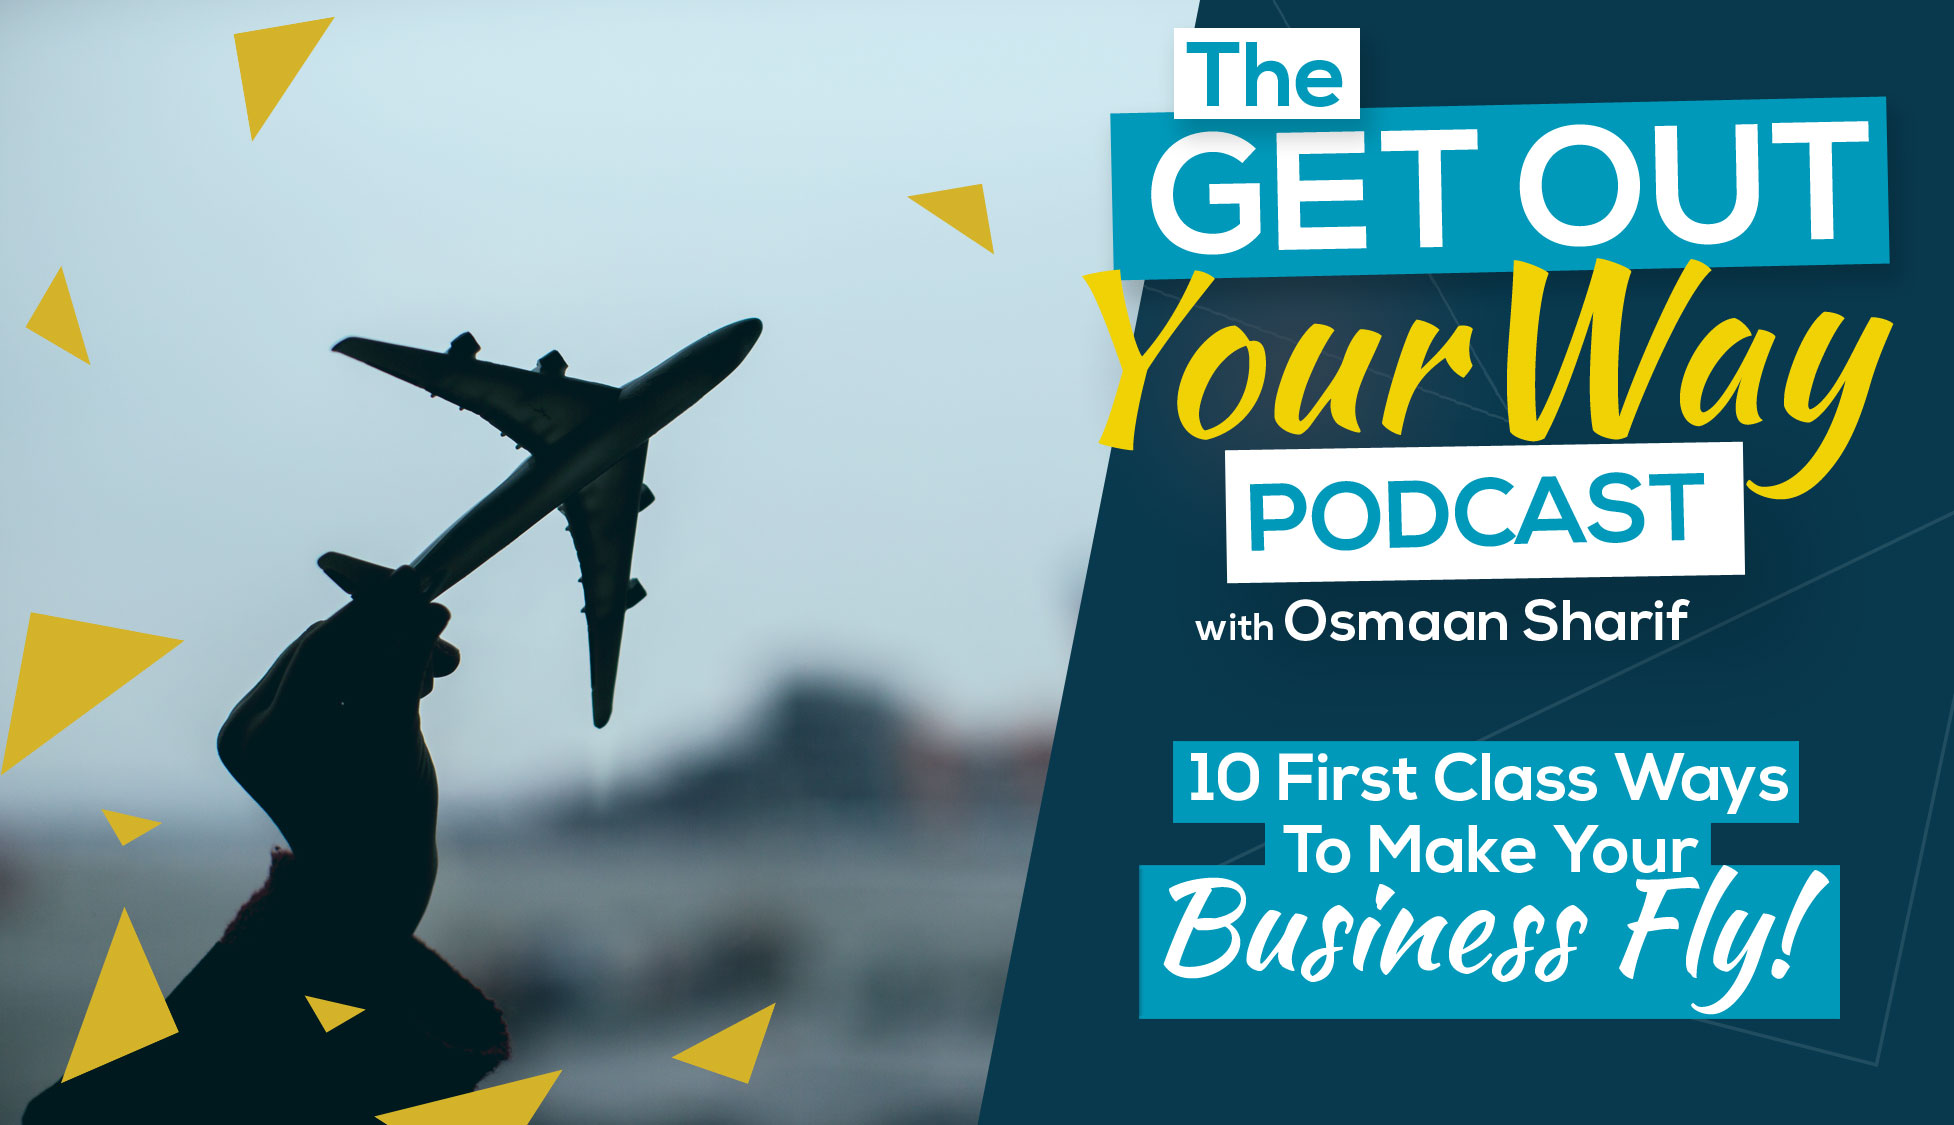 10 First Class Ways to Make Your Business Fly!